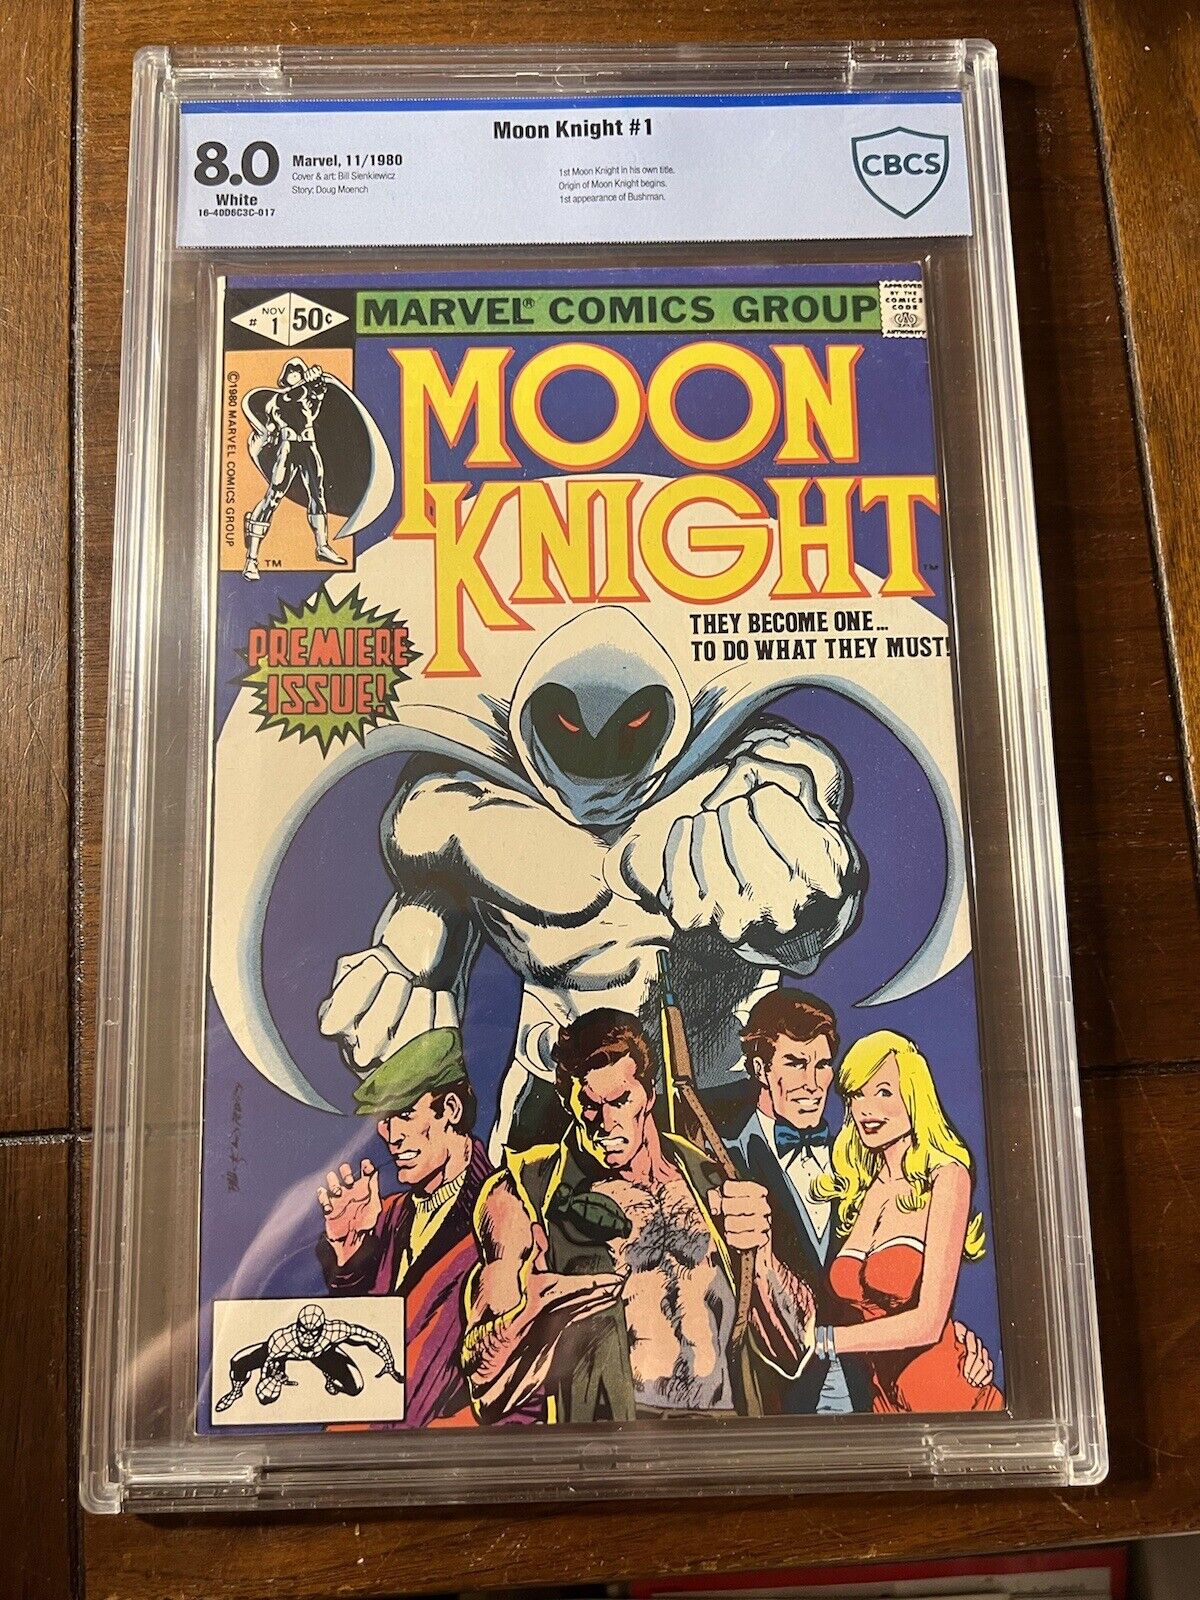 MOON KNIGHT #1 11/80 CBCS 8.0 WHITE  - FIRST SERIES FIRST ISSUE.  CHEAP SLAB!